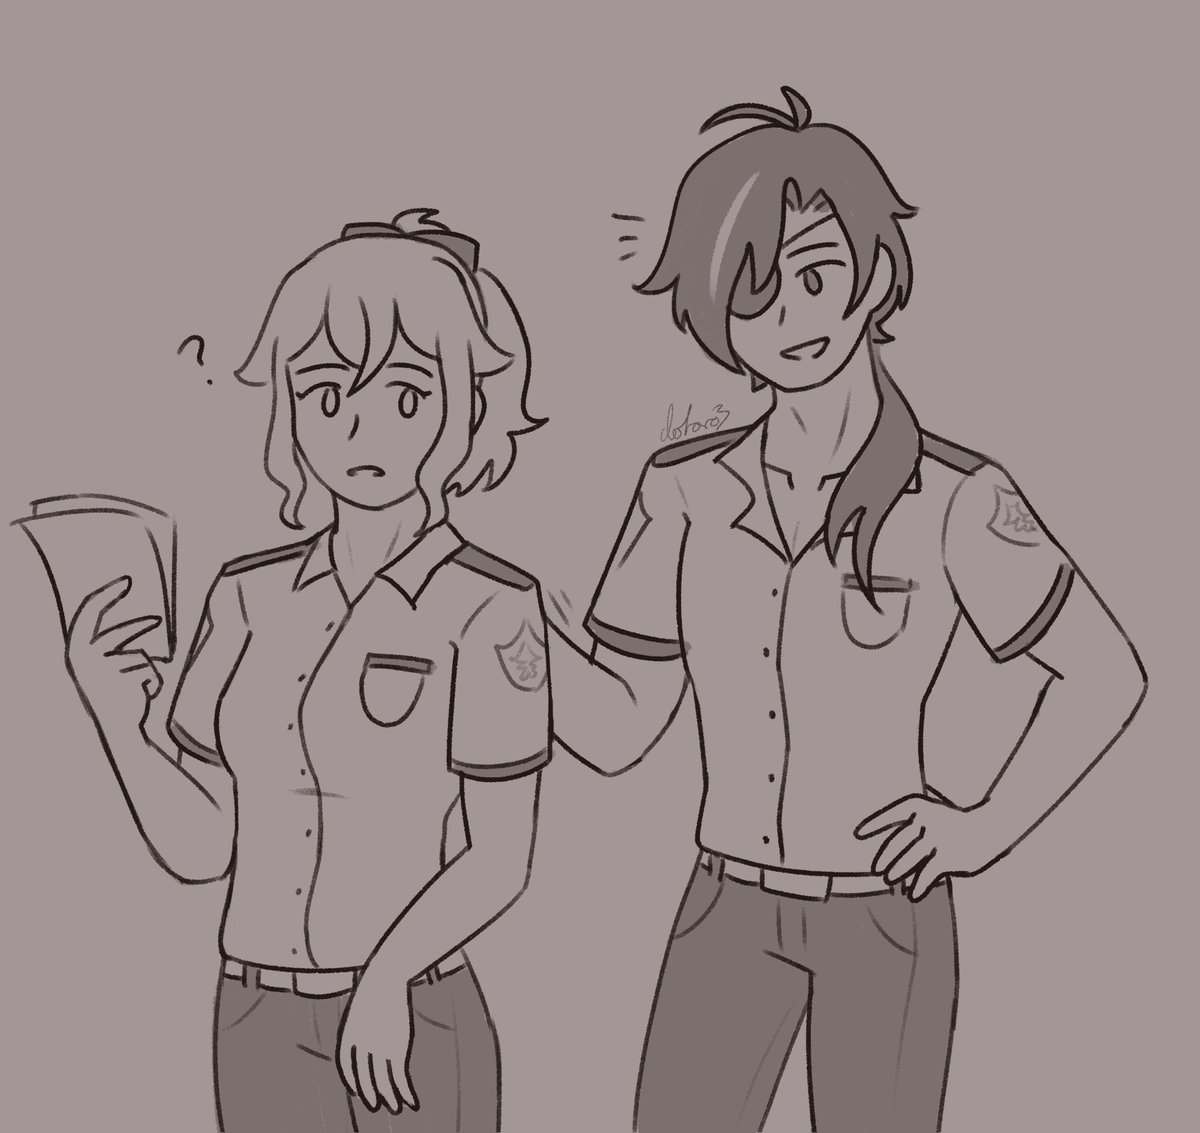 merluc au timeskip to where jean and kaeya work as favonius coast guards, no sign of diluc anywhere after all these years
#jean #kaeya 